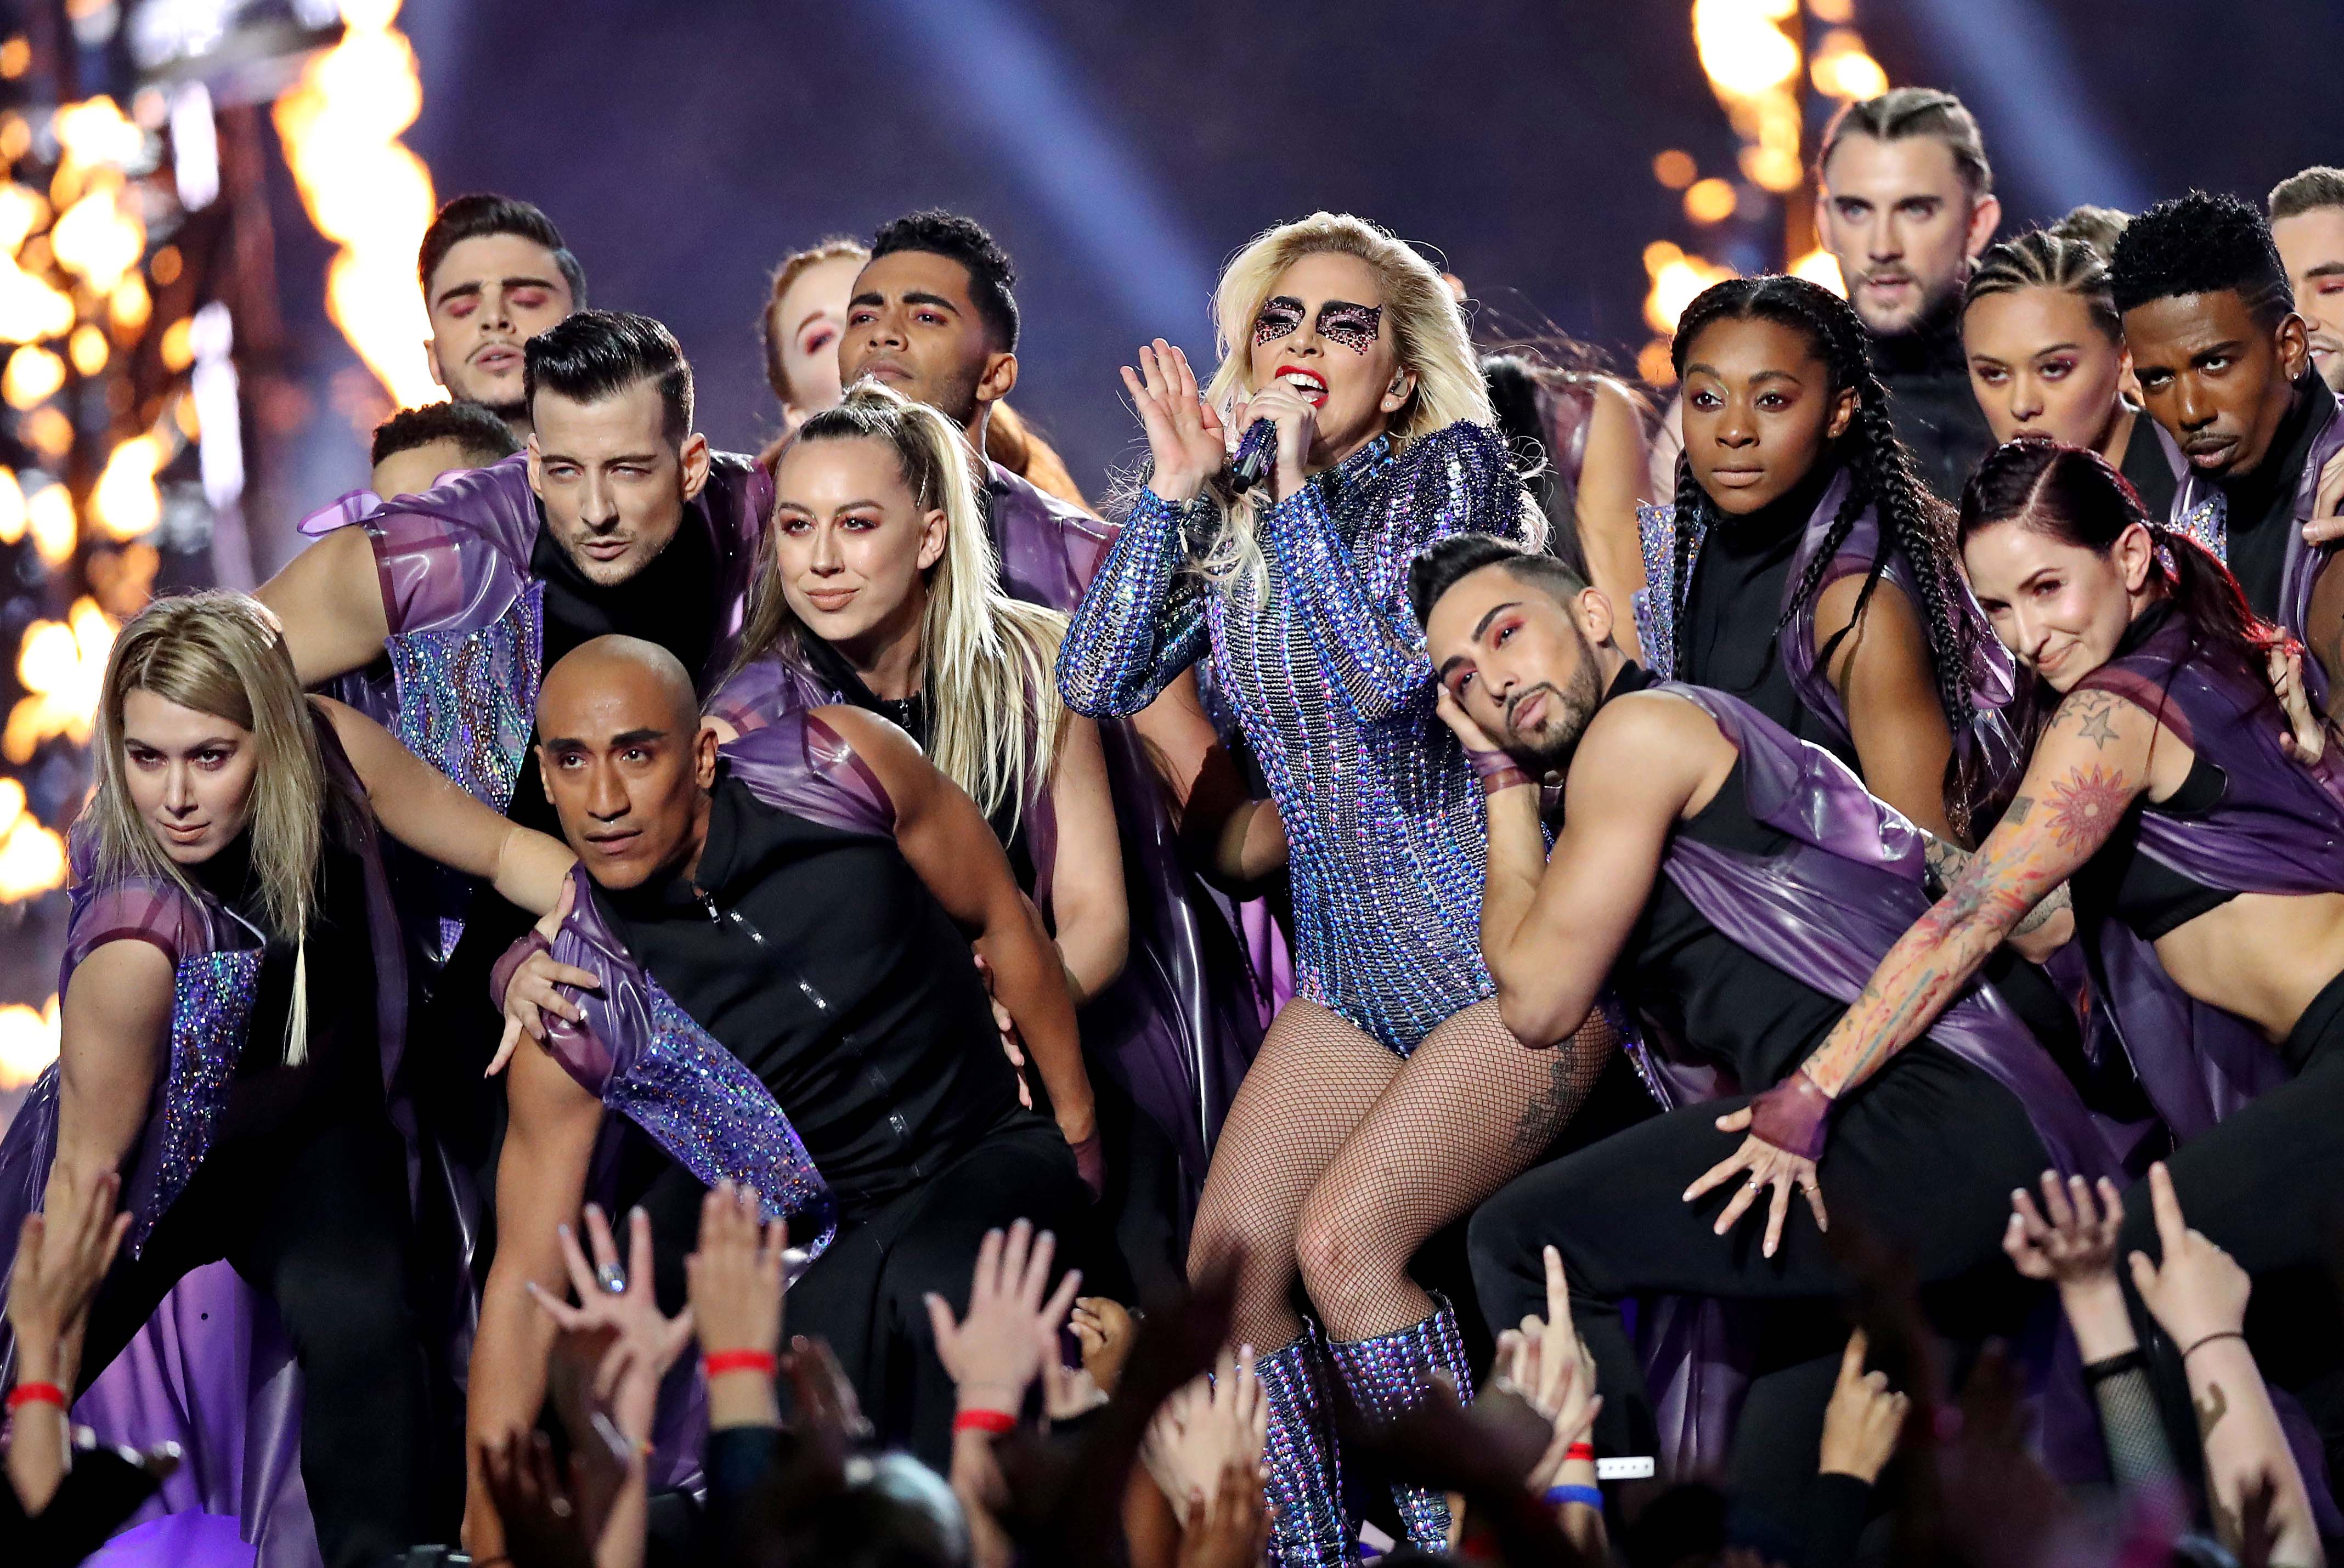 Watch Lady Gaga’s full flashy Super Bowl 51 halftime show | For The Win